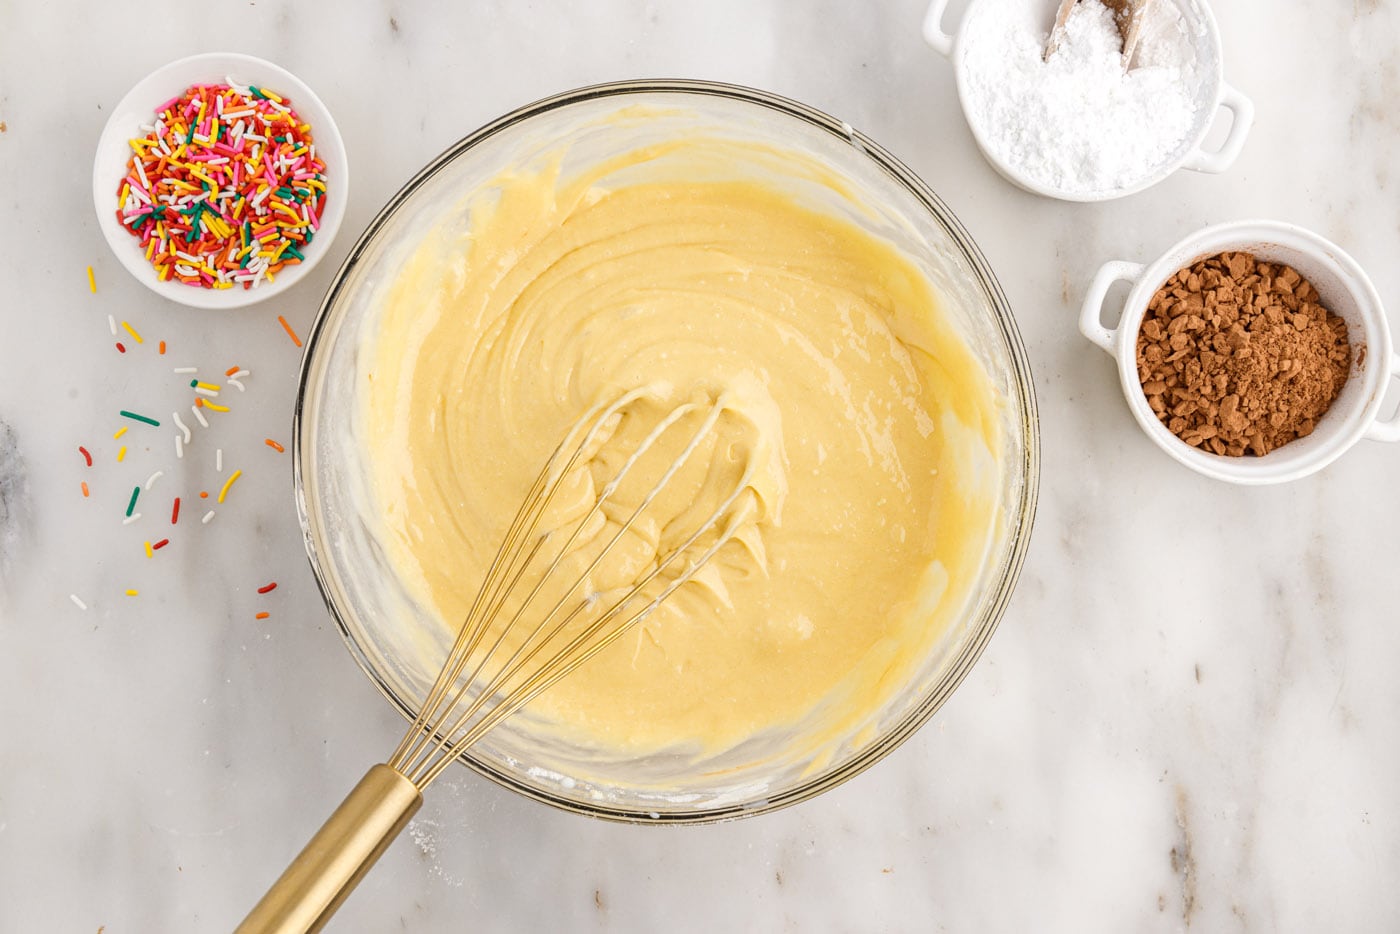 whisking together cake mix with eggs, milk, oil, and sour cream